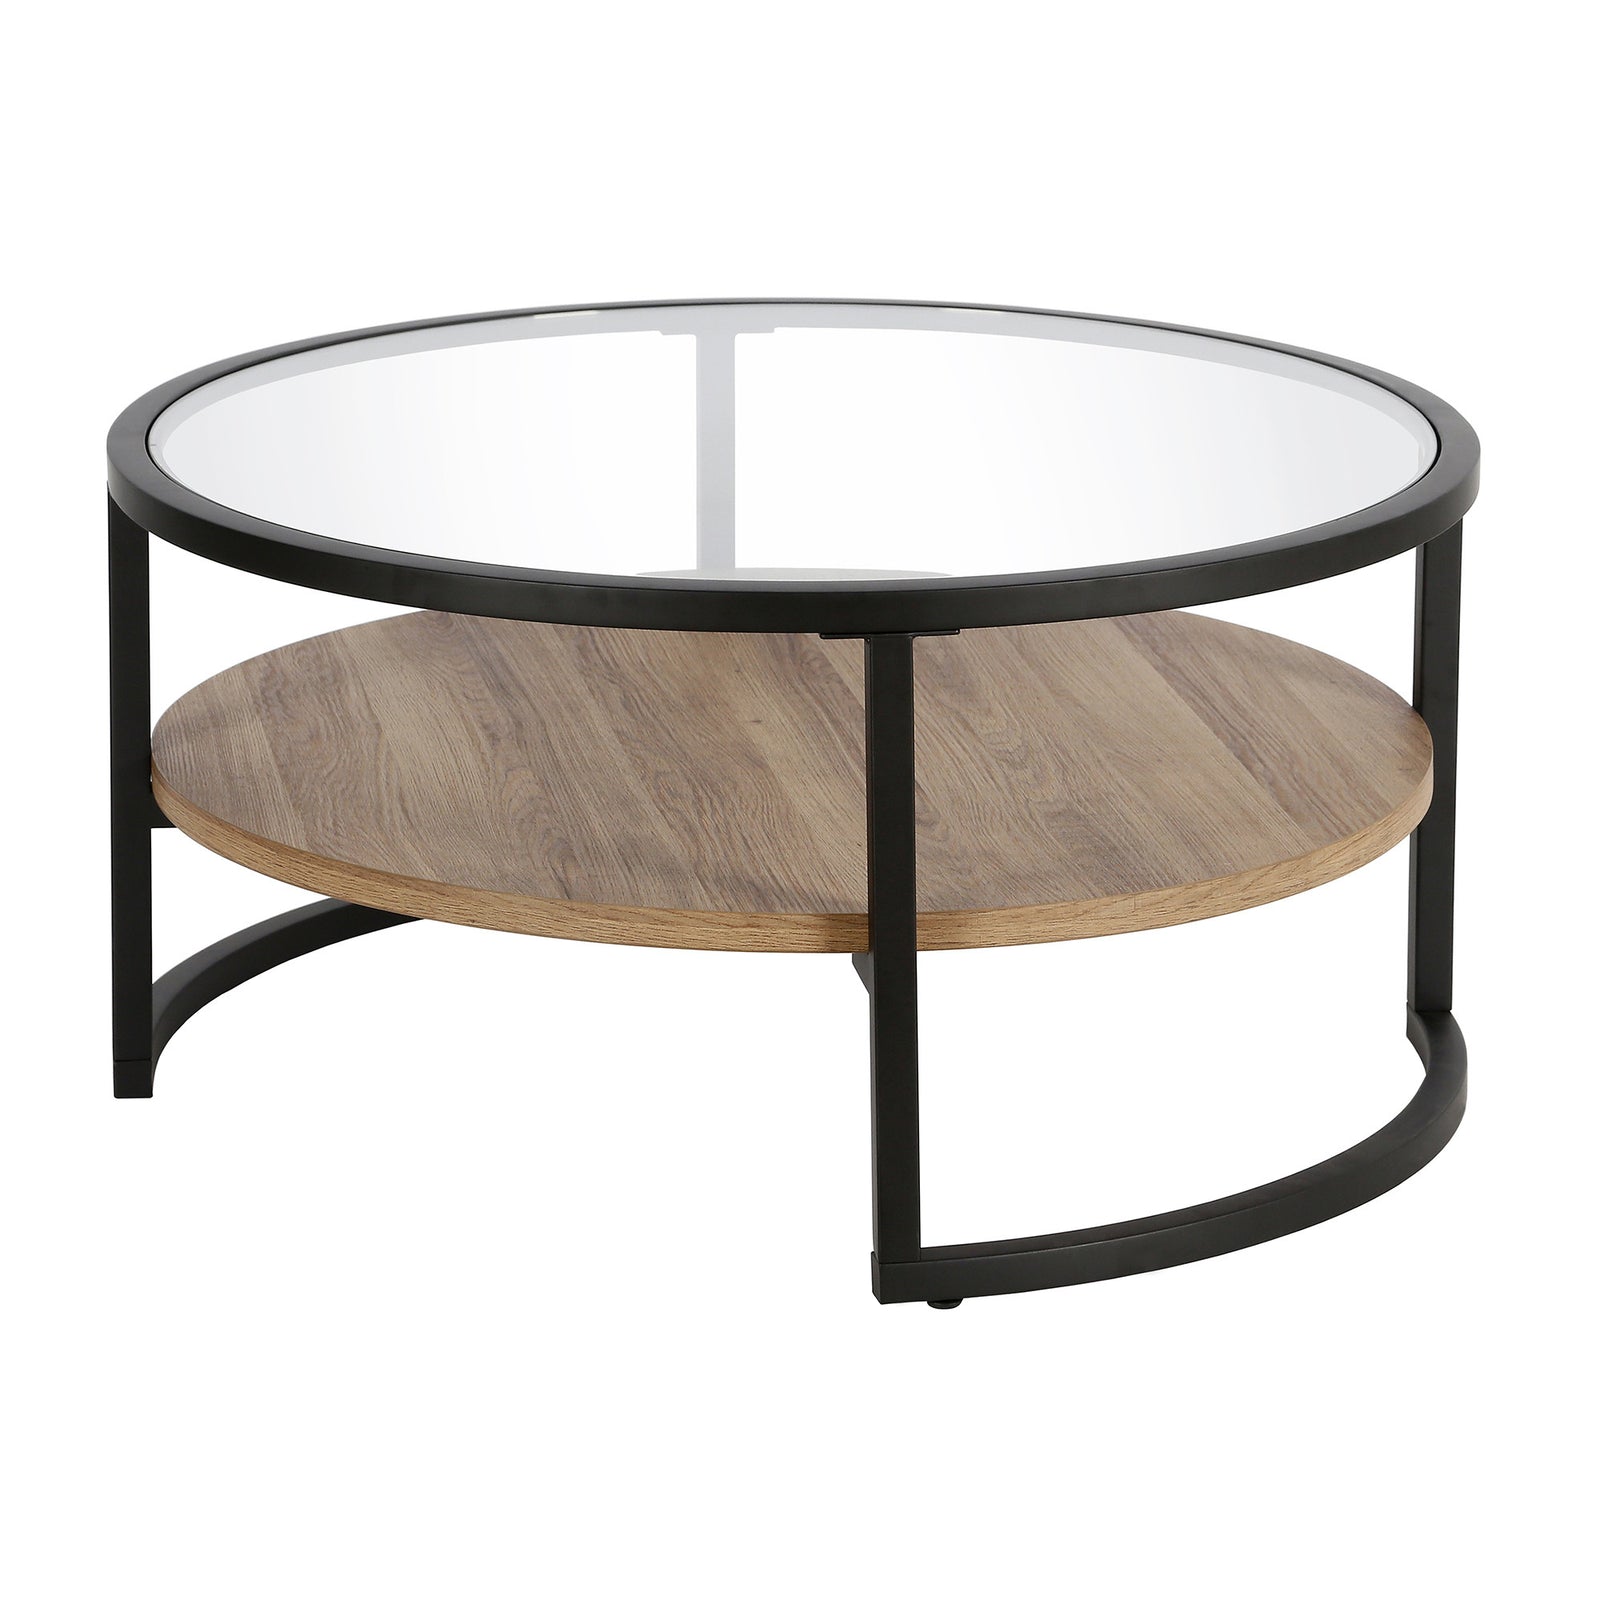 34" Black Brown and Glass Round Coffee Table With Shelf